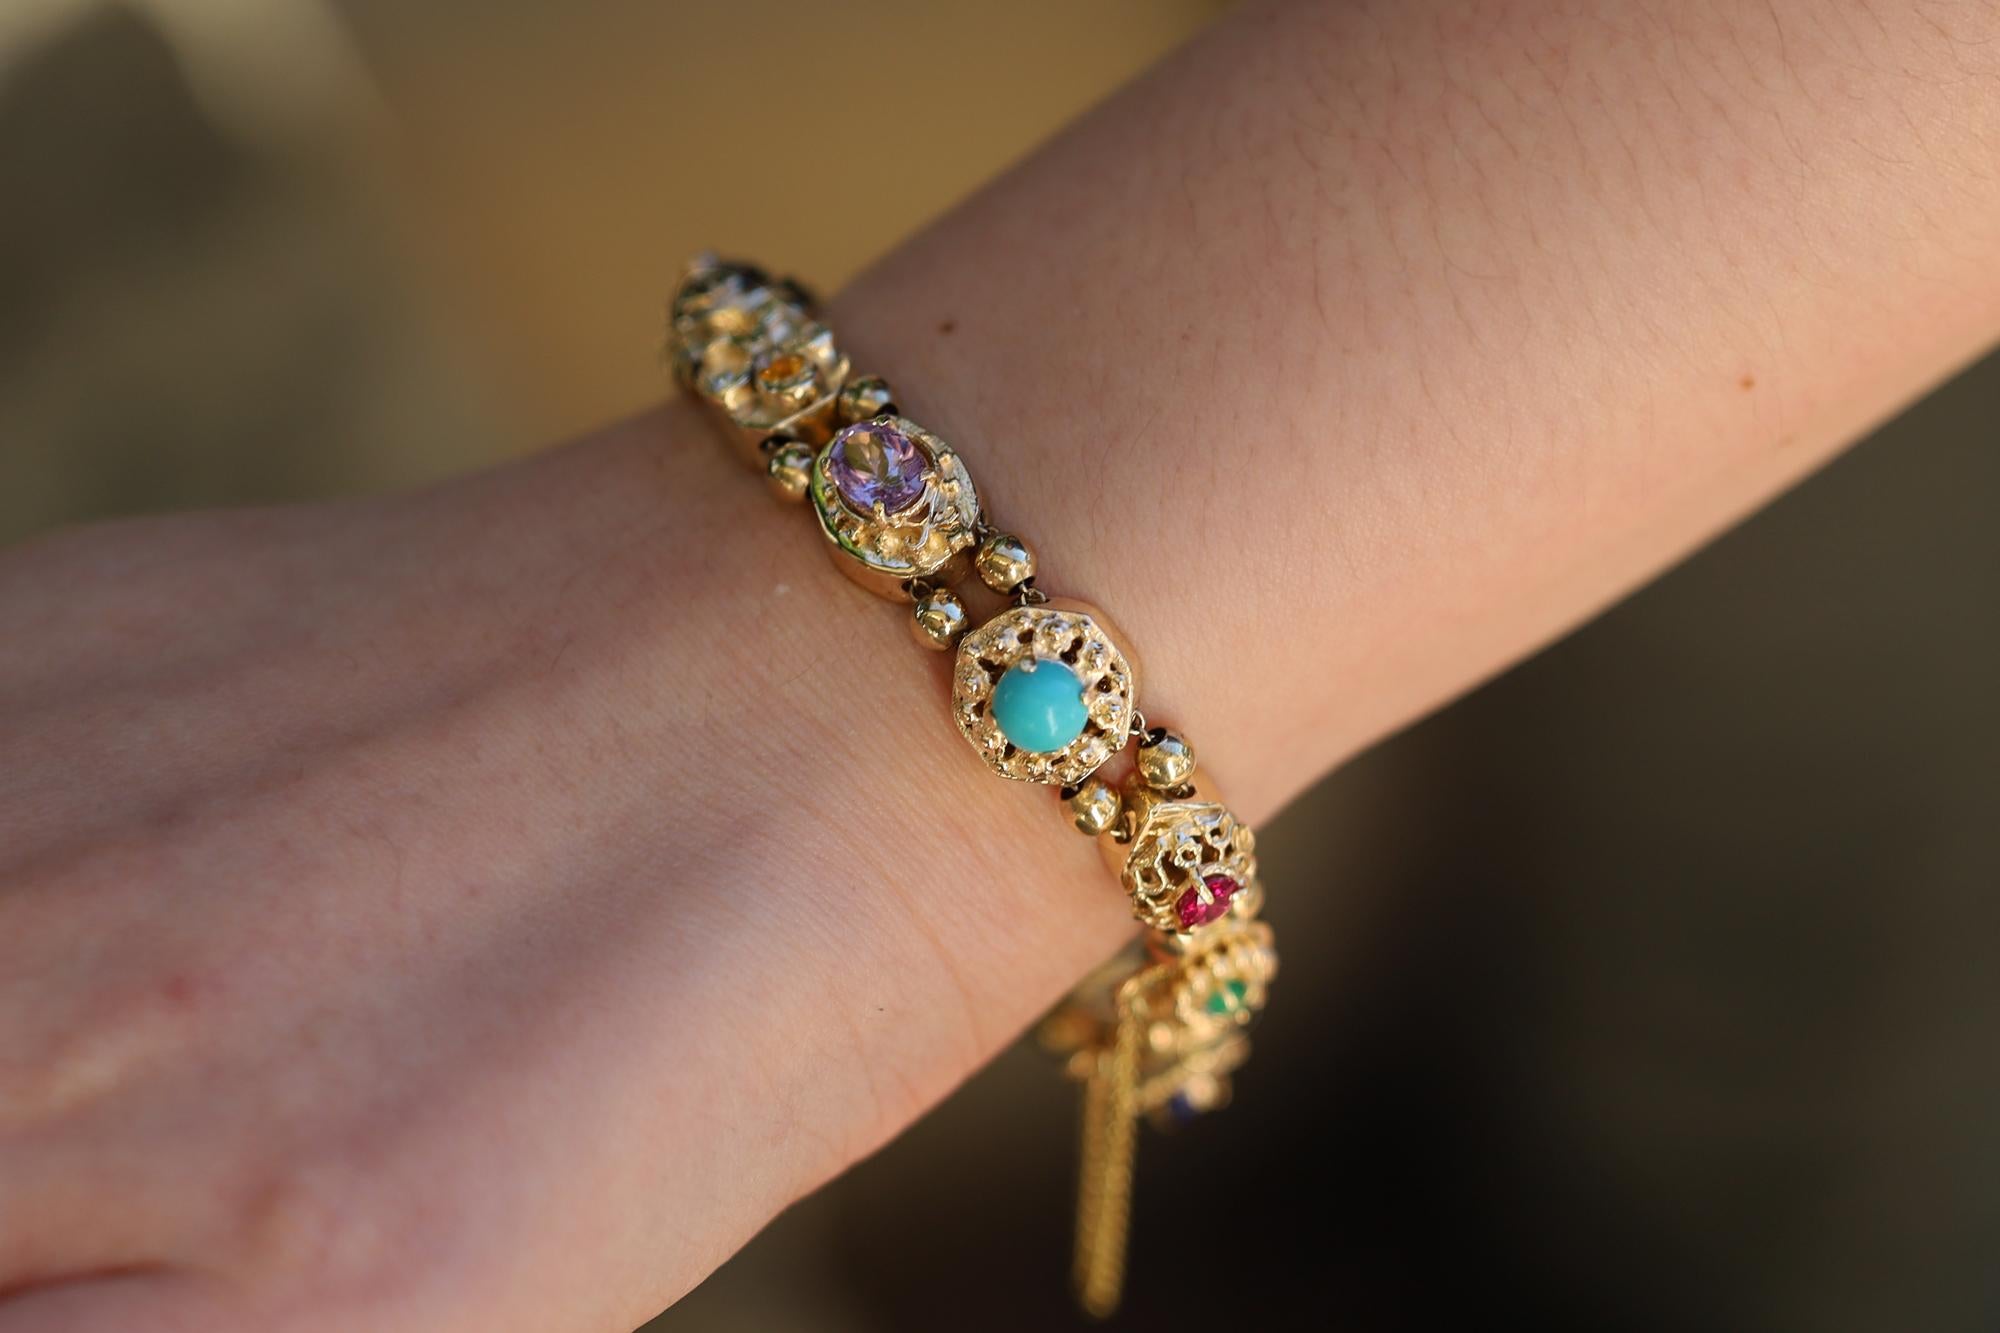 OTHER SLIDE BRACELET DESCRIPTION

Vintage and lively with charm, this Victorian inspired slide bracelet displays a multitude of natural, multi color gemstones. From pearls to diamonds, to vibrant green peridot, citrine, turquoise, amethyst, sapphire